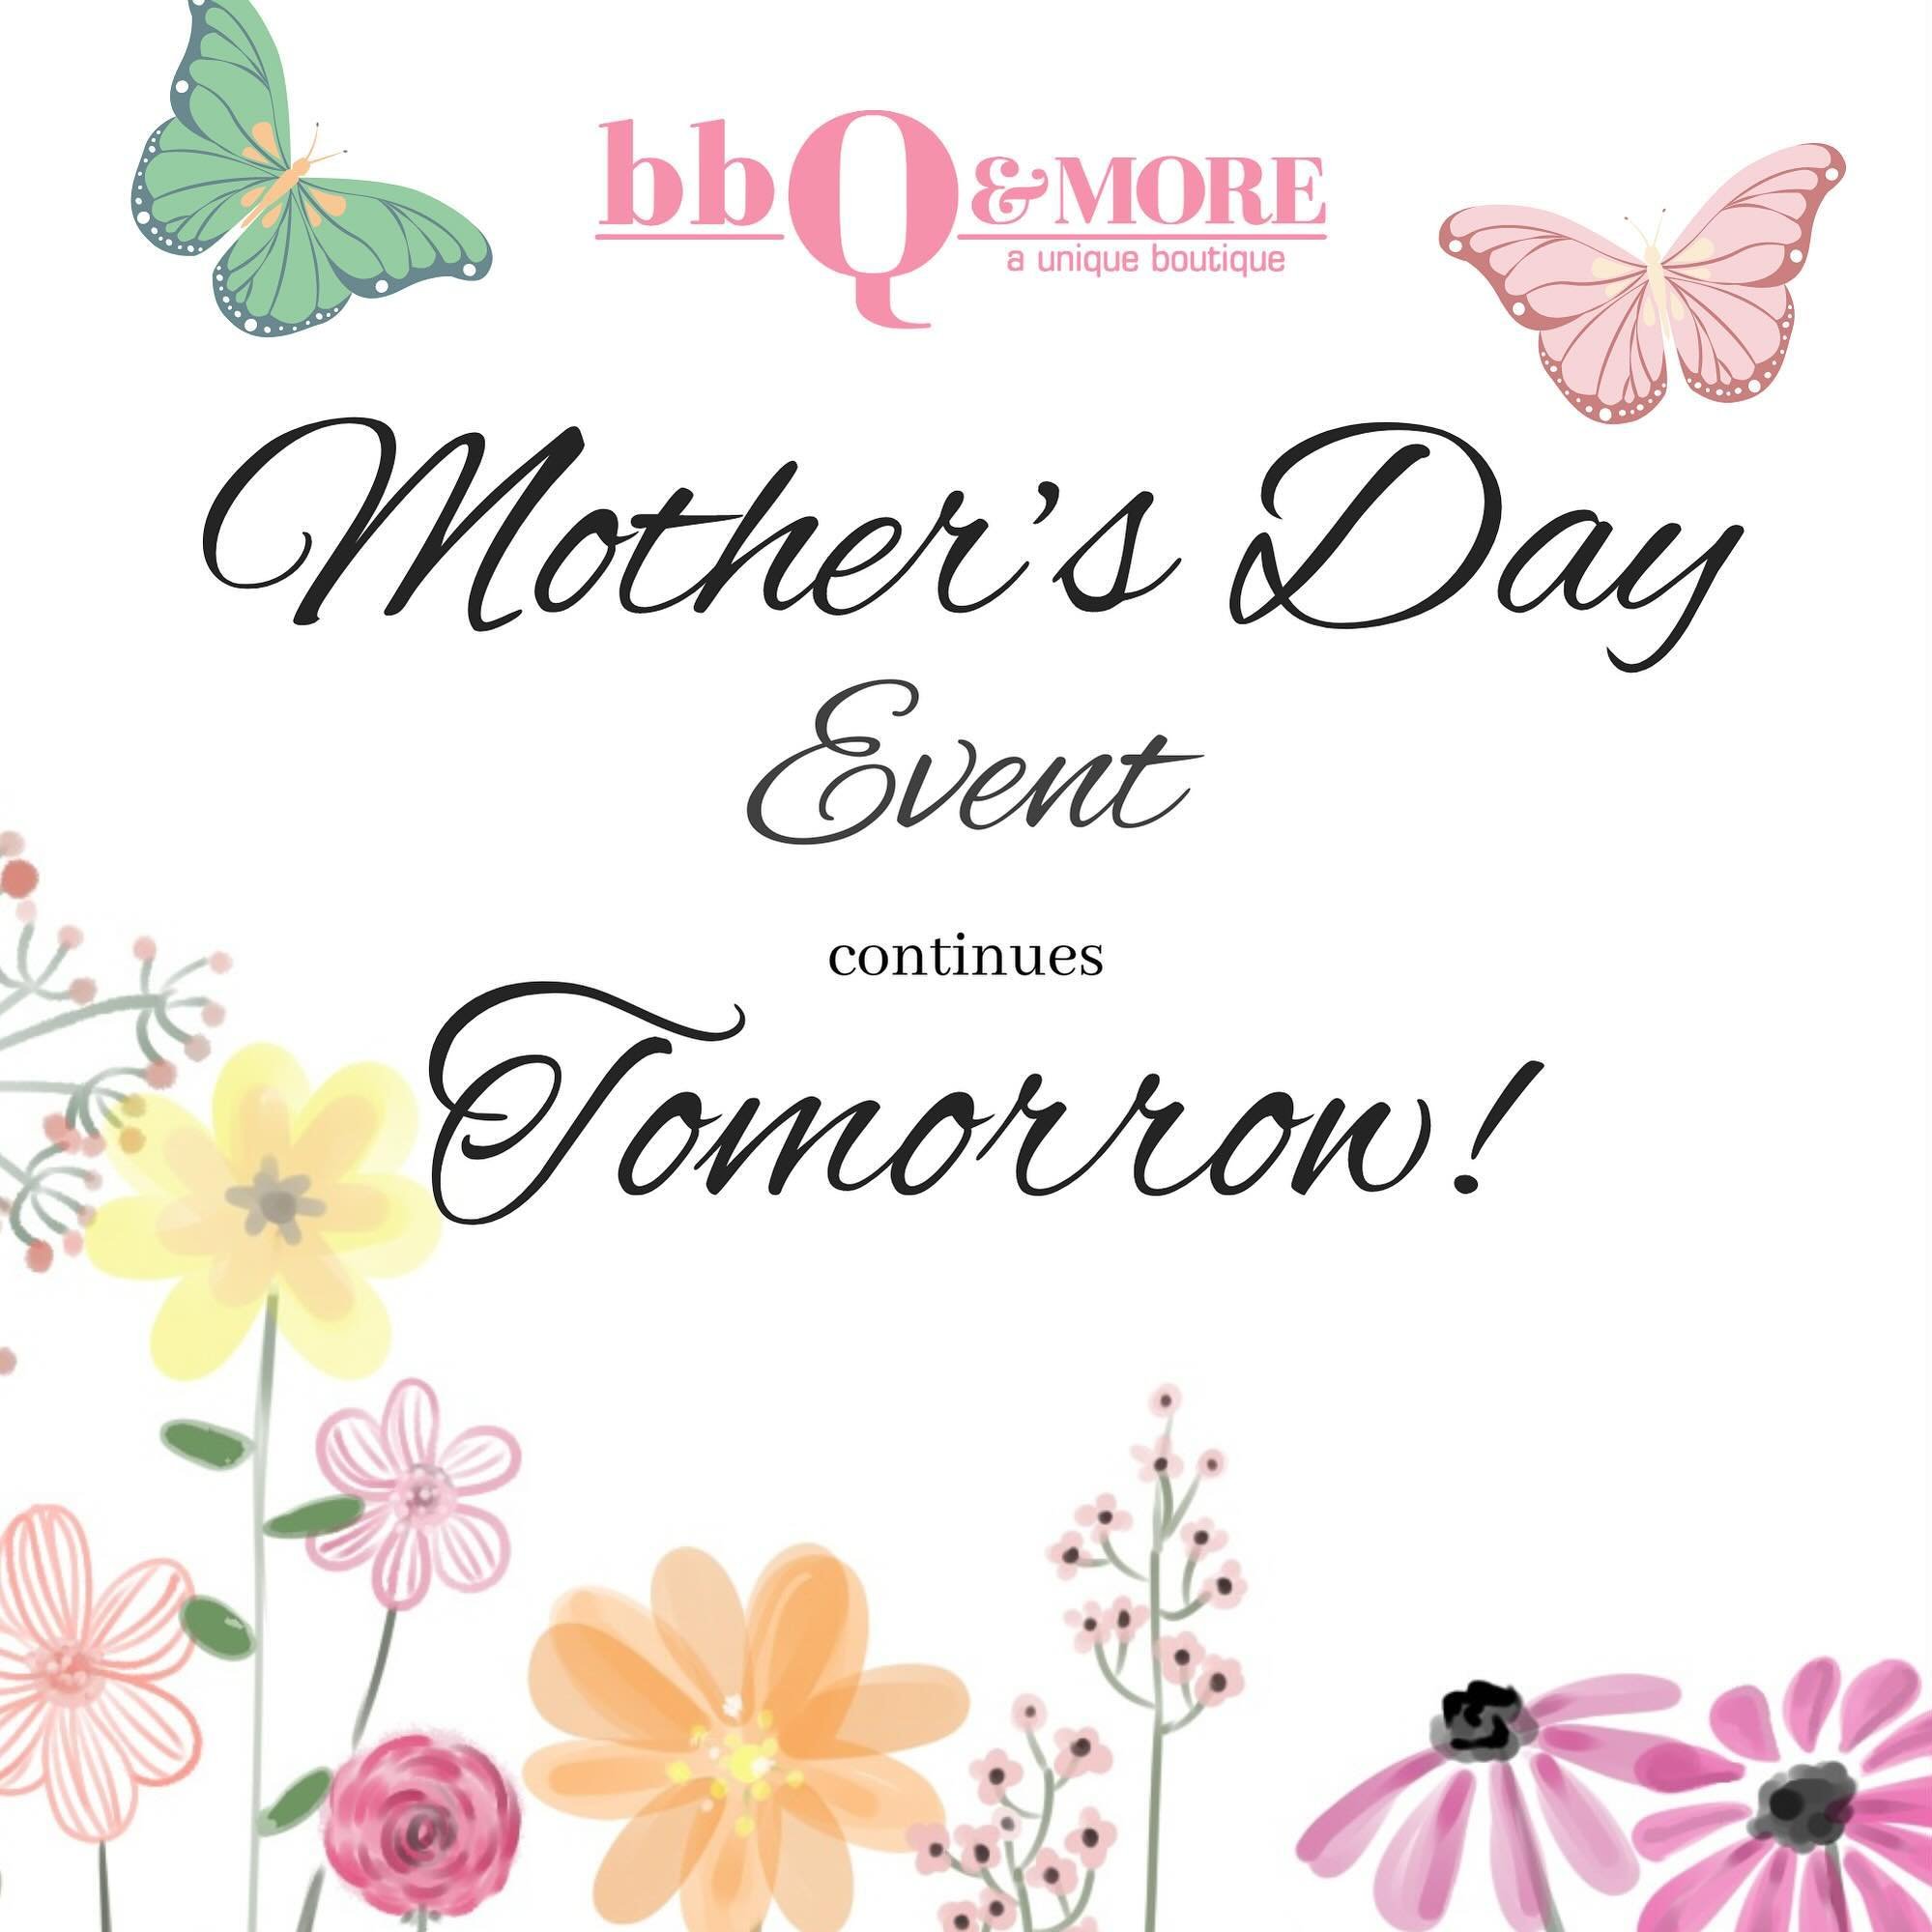 Today was amazing! The fun continues tomorrow from 10-5!

There will be food, fun, and perks! 

During the event, if you purchase $250 in Mackenzie Child&rsquo;s you will receive a FREE teacup with rose! 

#Mothersday #ShopSmall #PaducahKy #bbqandmor